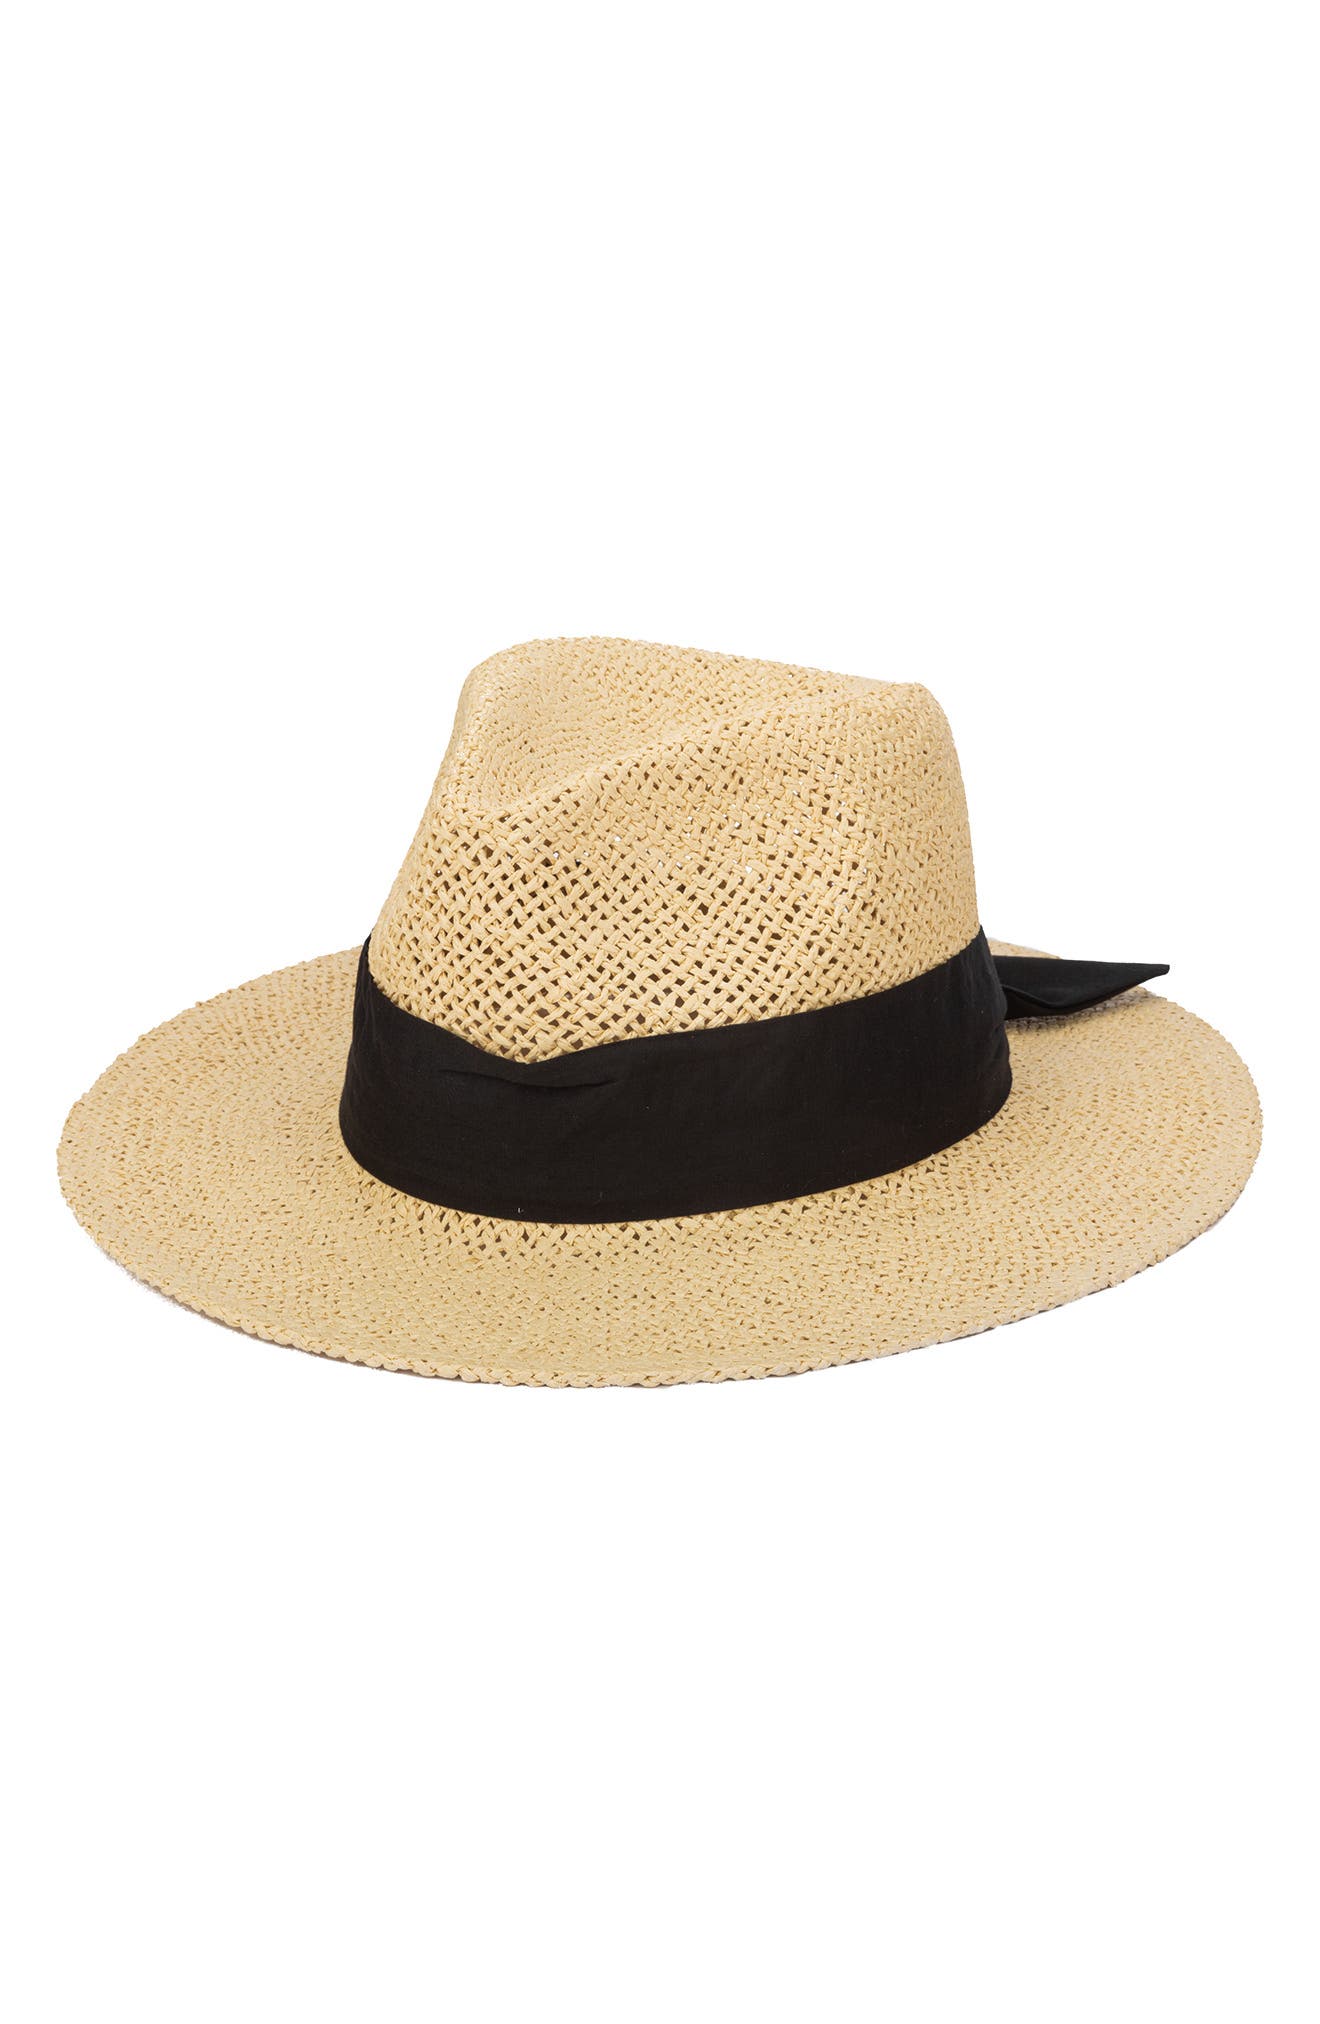 By Neki Mens Trilby Hat with Contrasting Striped Hat Band UK Seller